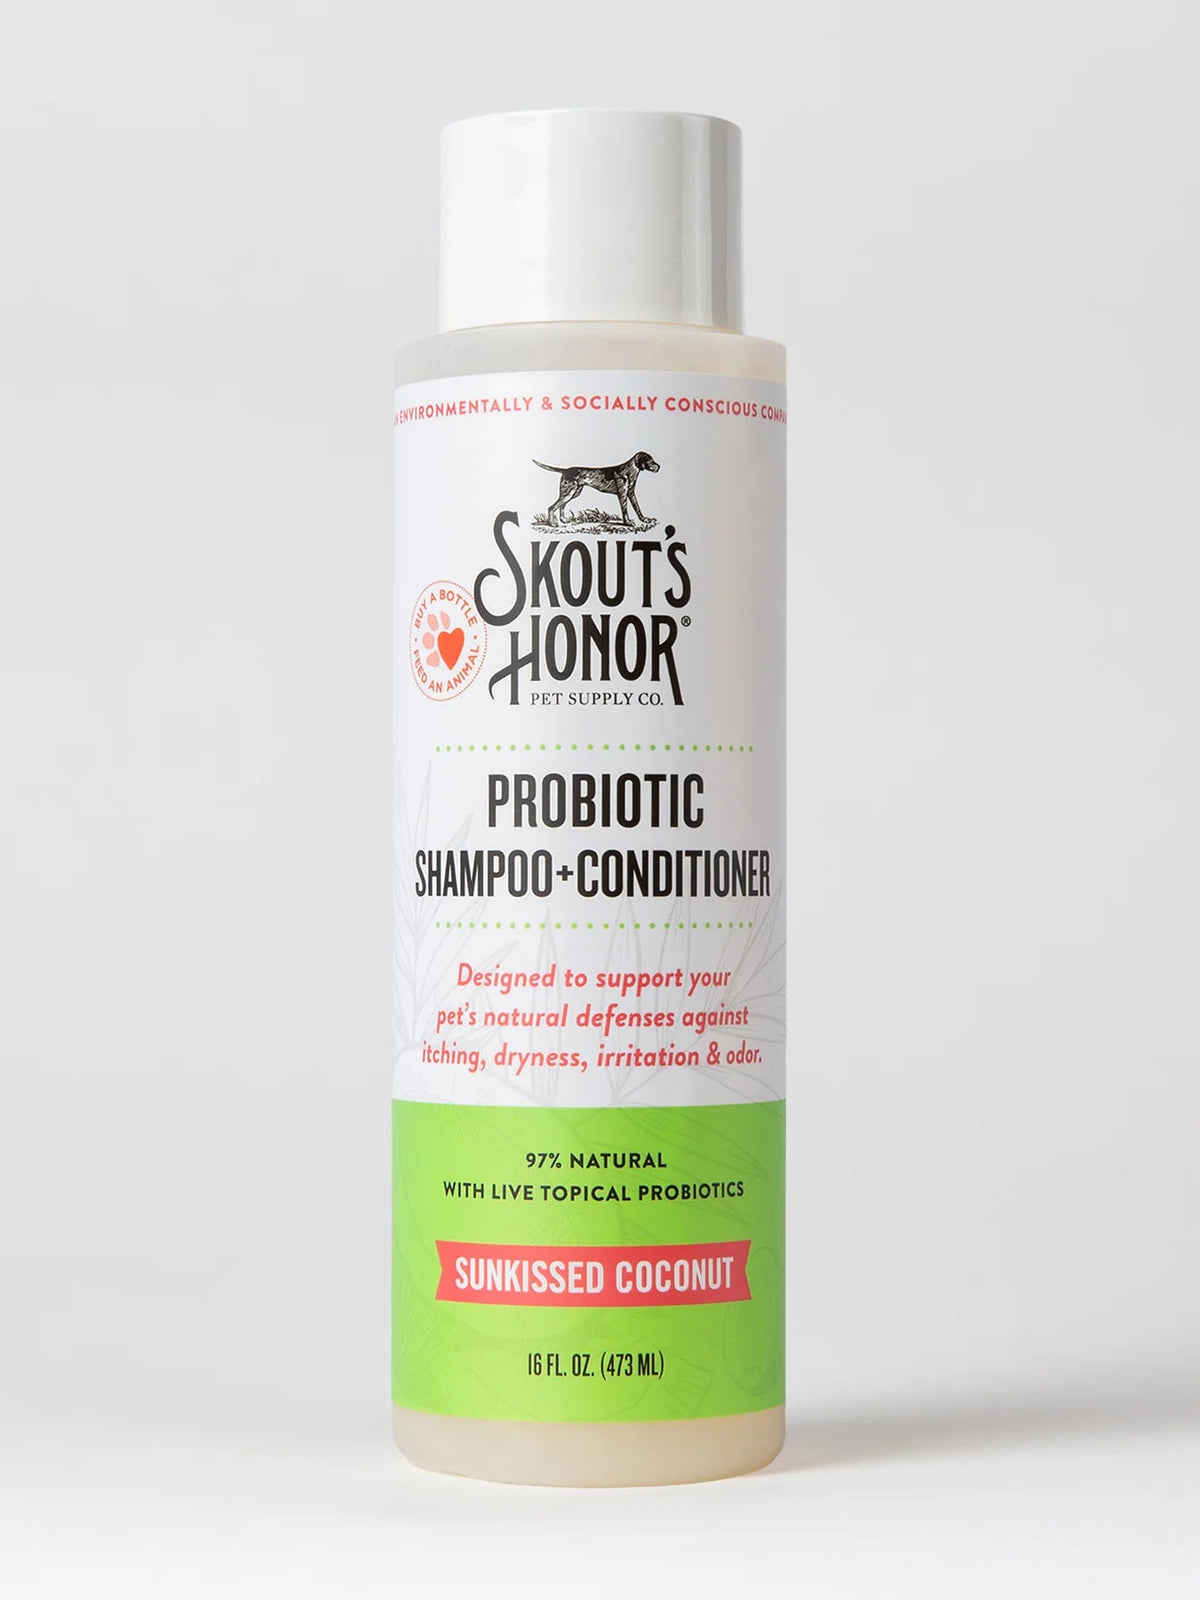 Skouts Honor Dog Probiotic Shampoo Conditioner Sunkissed Coconut 16oz-Four Muddy Paws